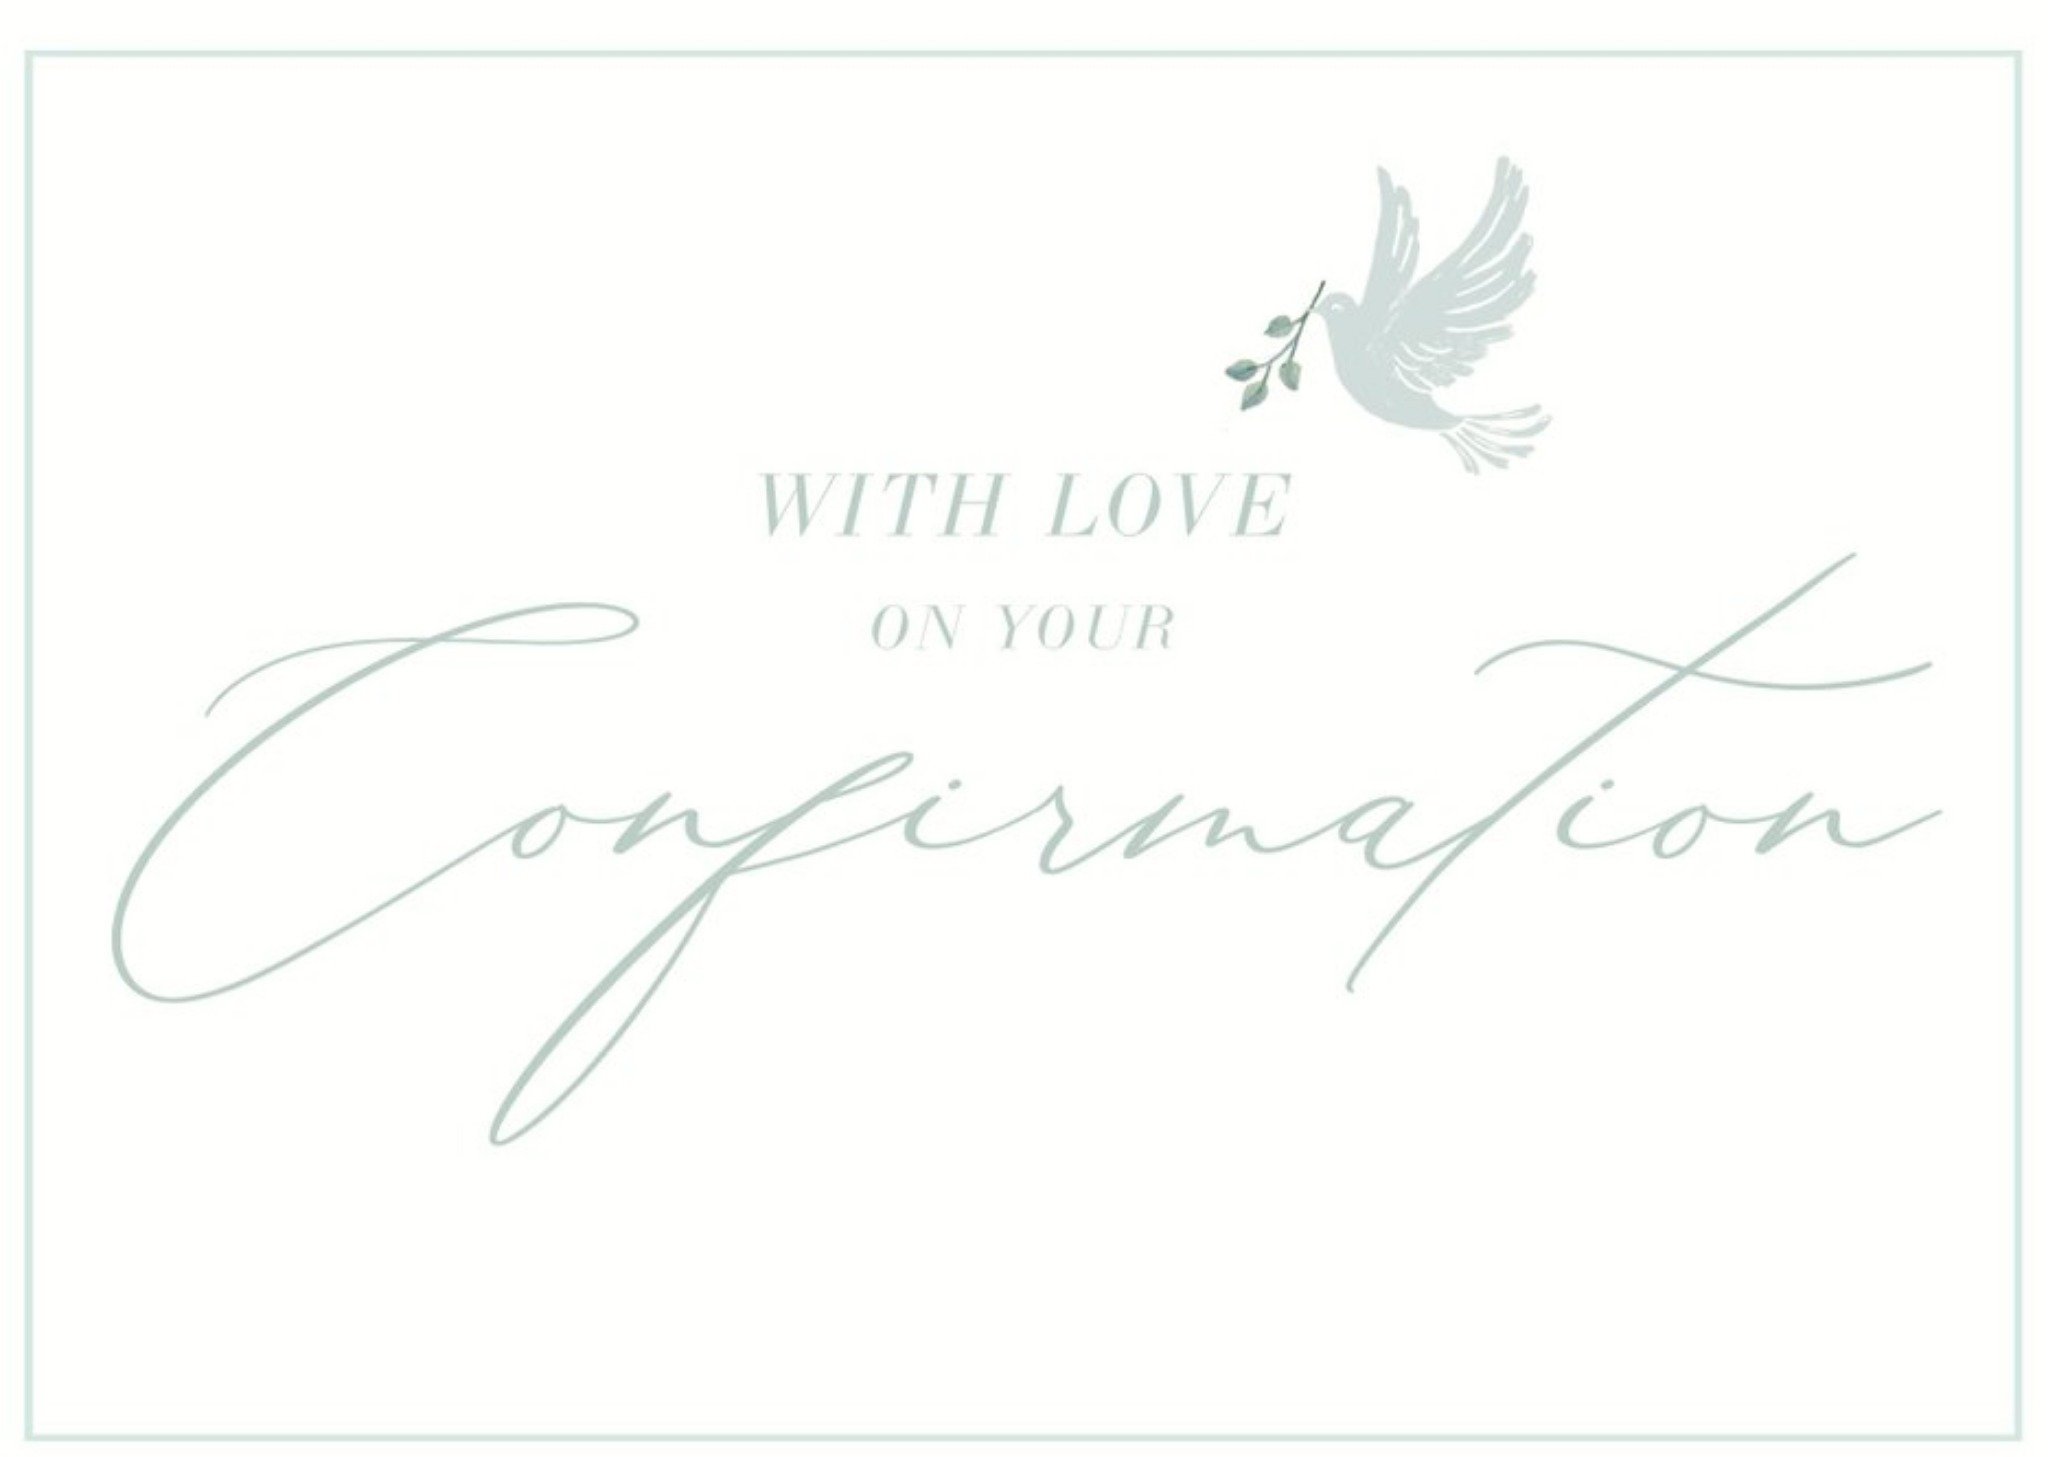 Moonpig Spot Illustration Of A Dove With An Olive Branch And Large Handwritten Typography Confirmati